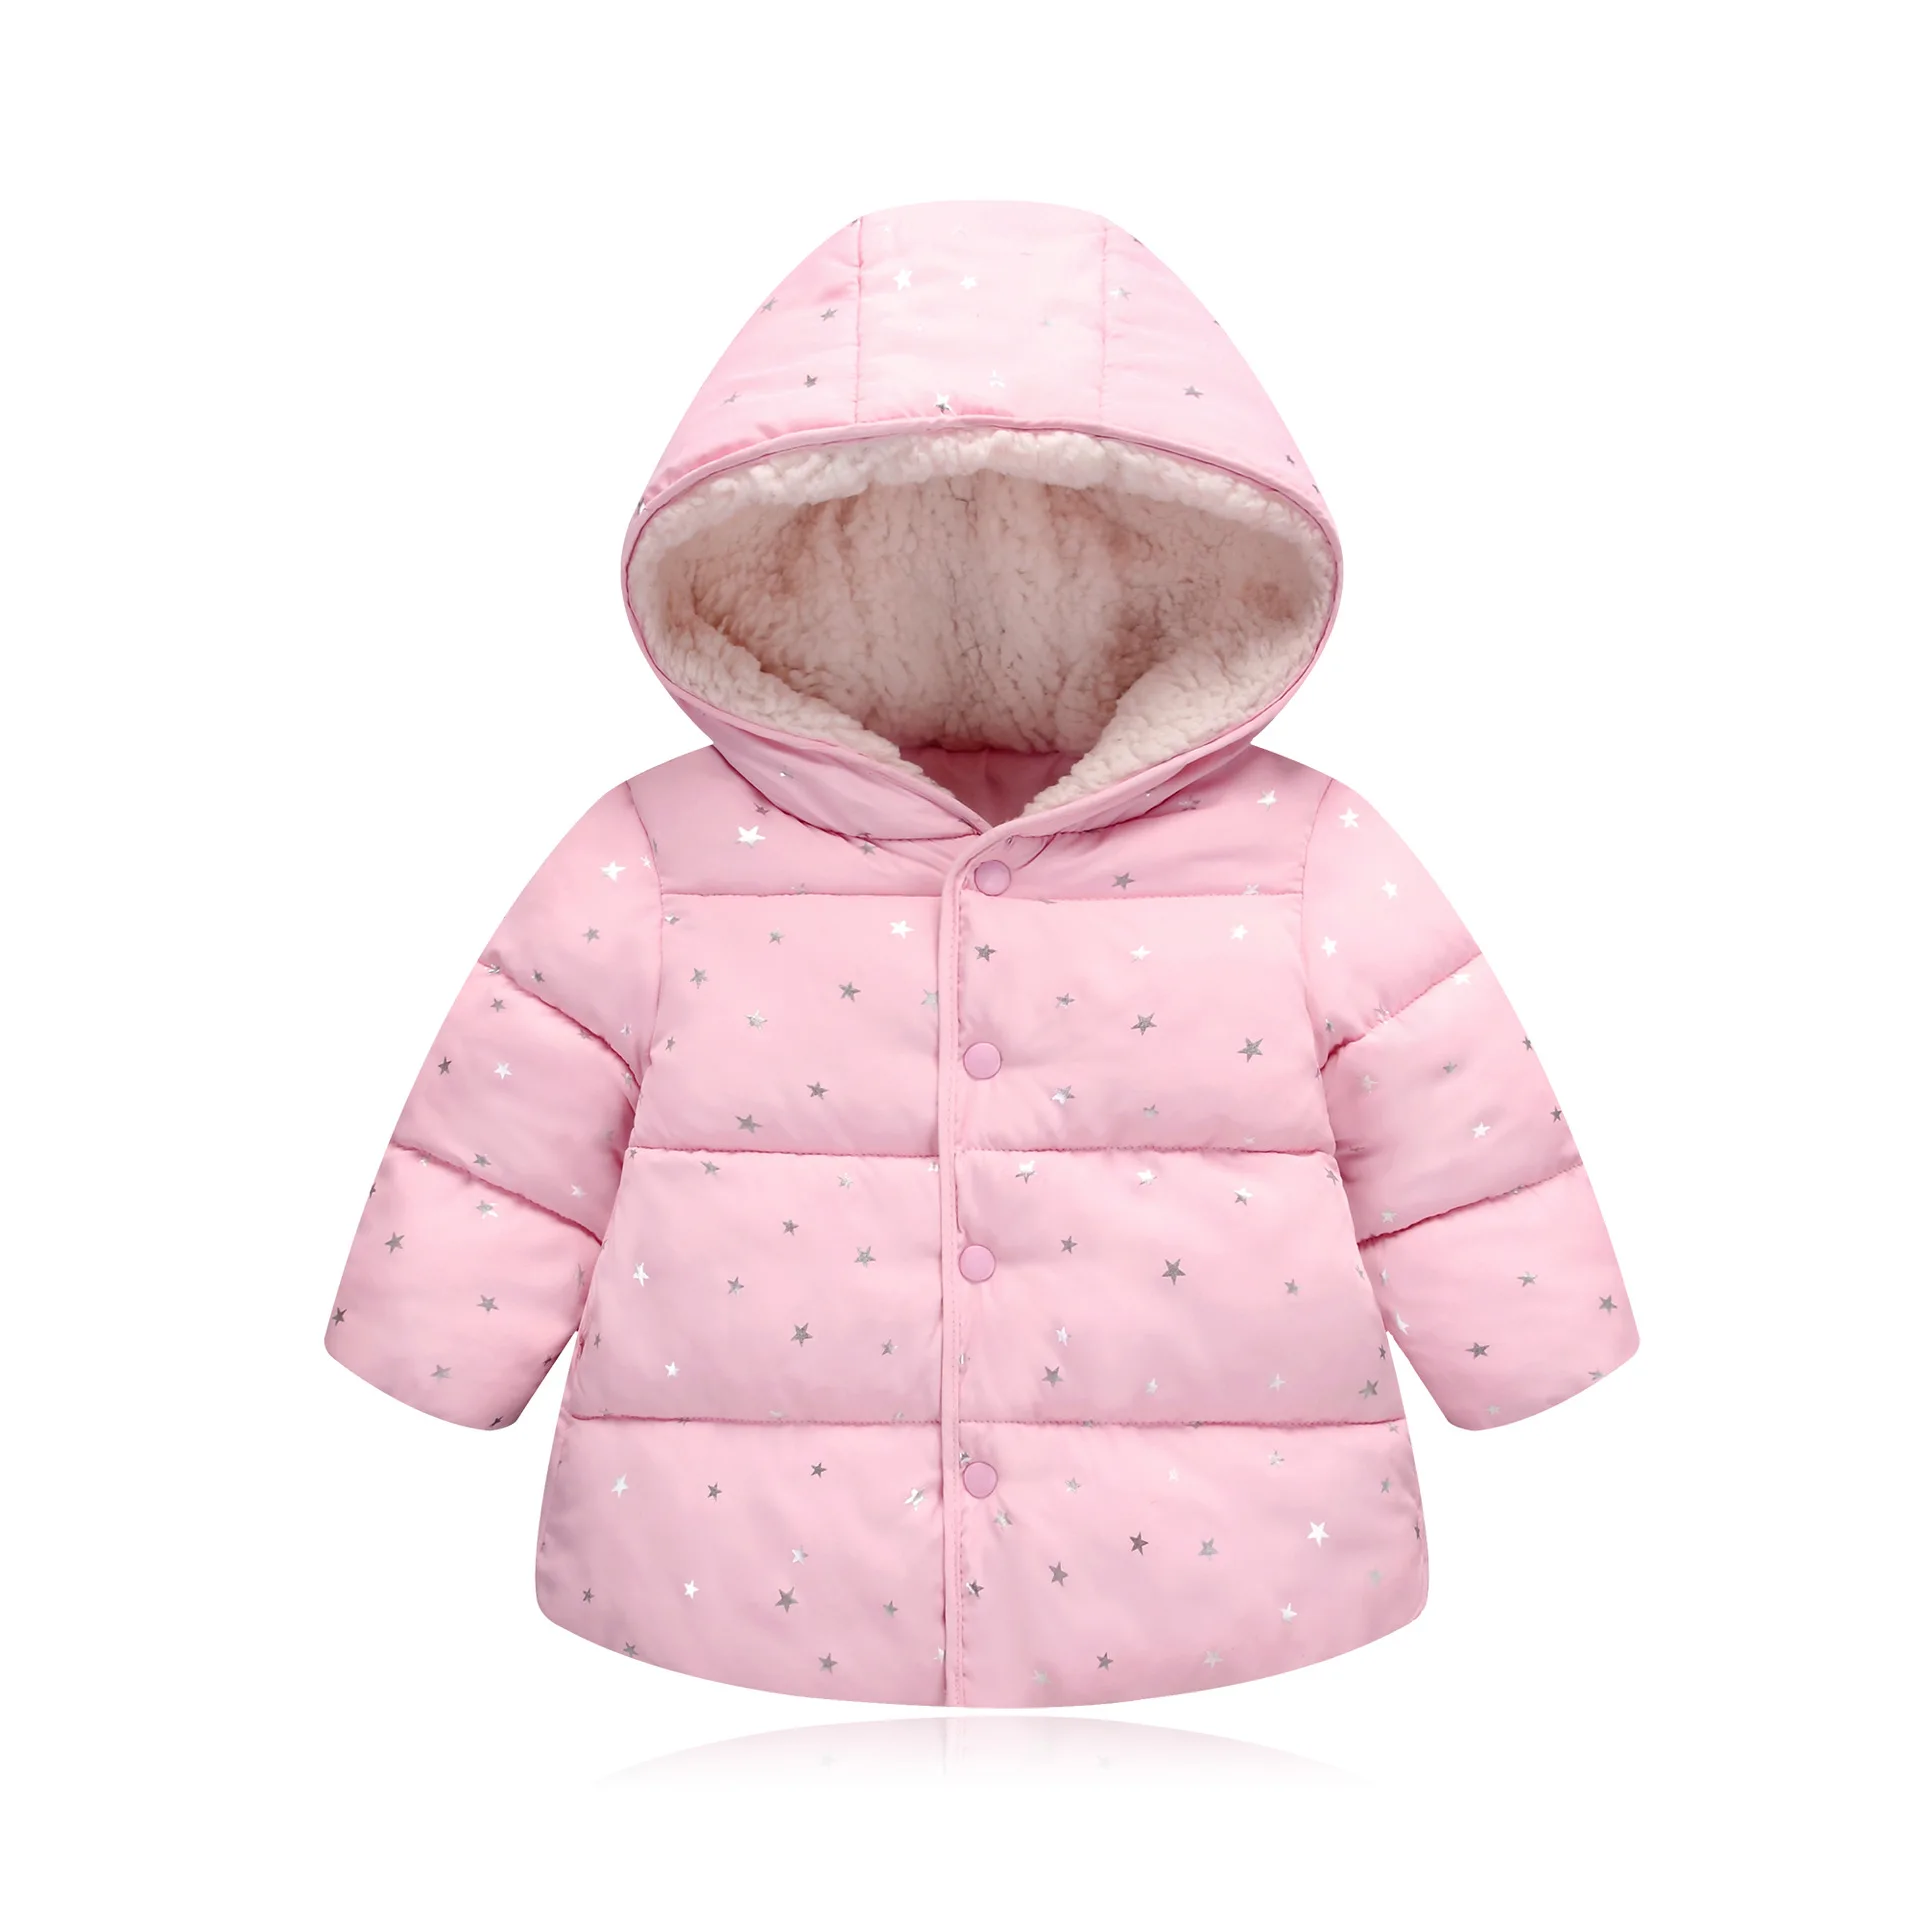 Girl Jackets Coat for Winter 2018 Children's Outerwear Down Cotton ...